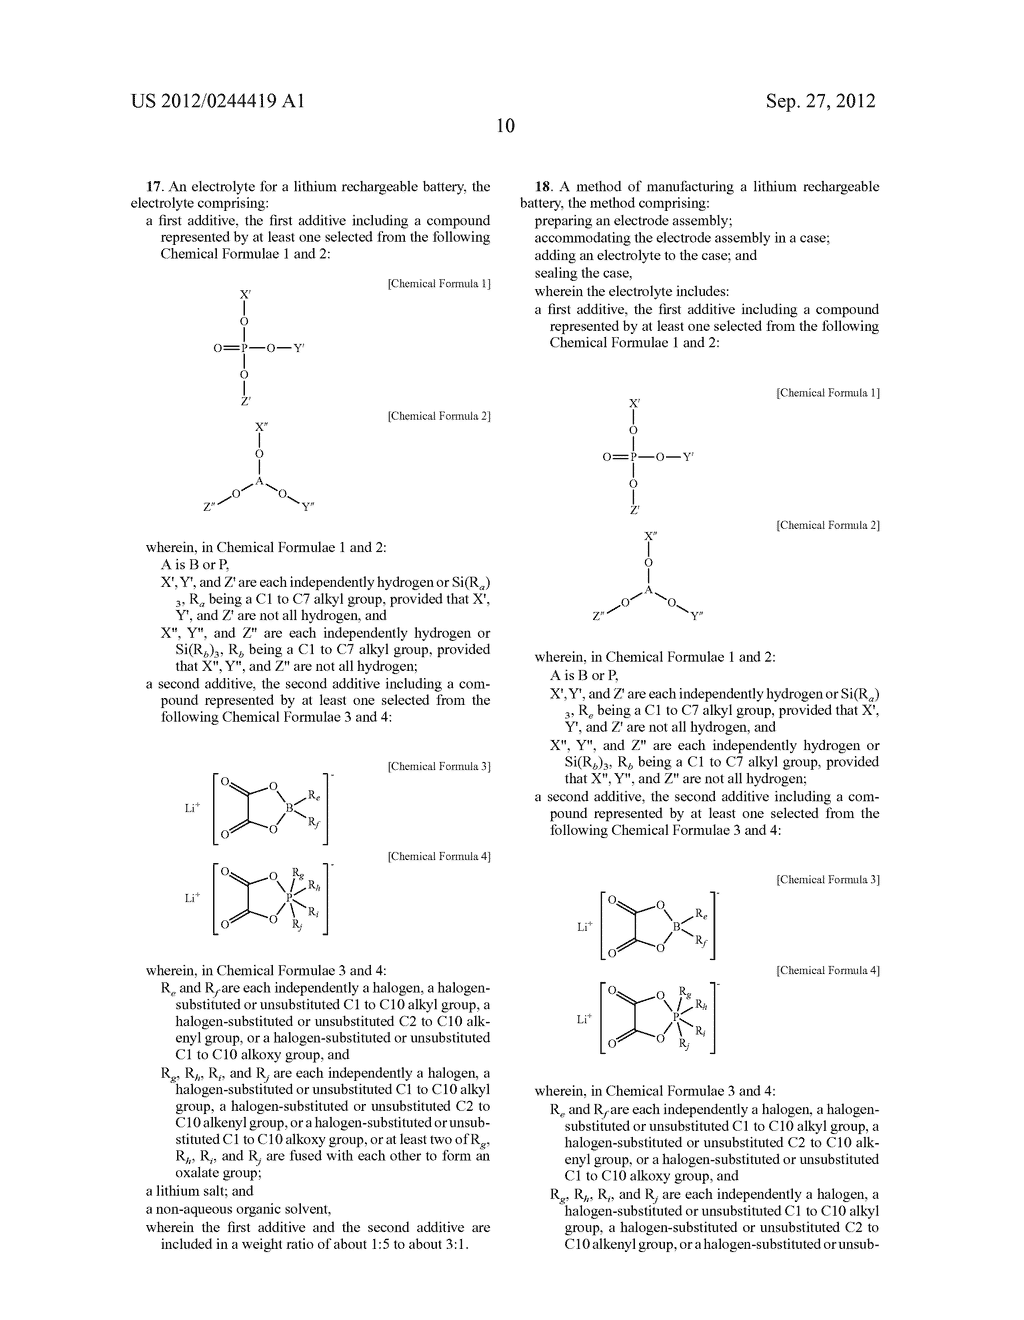 ELECTROLYTE FOR A LITHIUM RECHARGEABLE BATTERY, LITHIUM RECHARGEABLE     BATTERY INCLUDING THE SAME, AND METHOD OF MANUFACTURING A LITHIUM     RECHARGEABLE BATTERY - diagram, schematic, and image 12